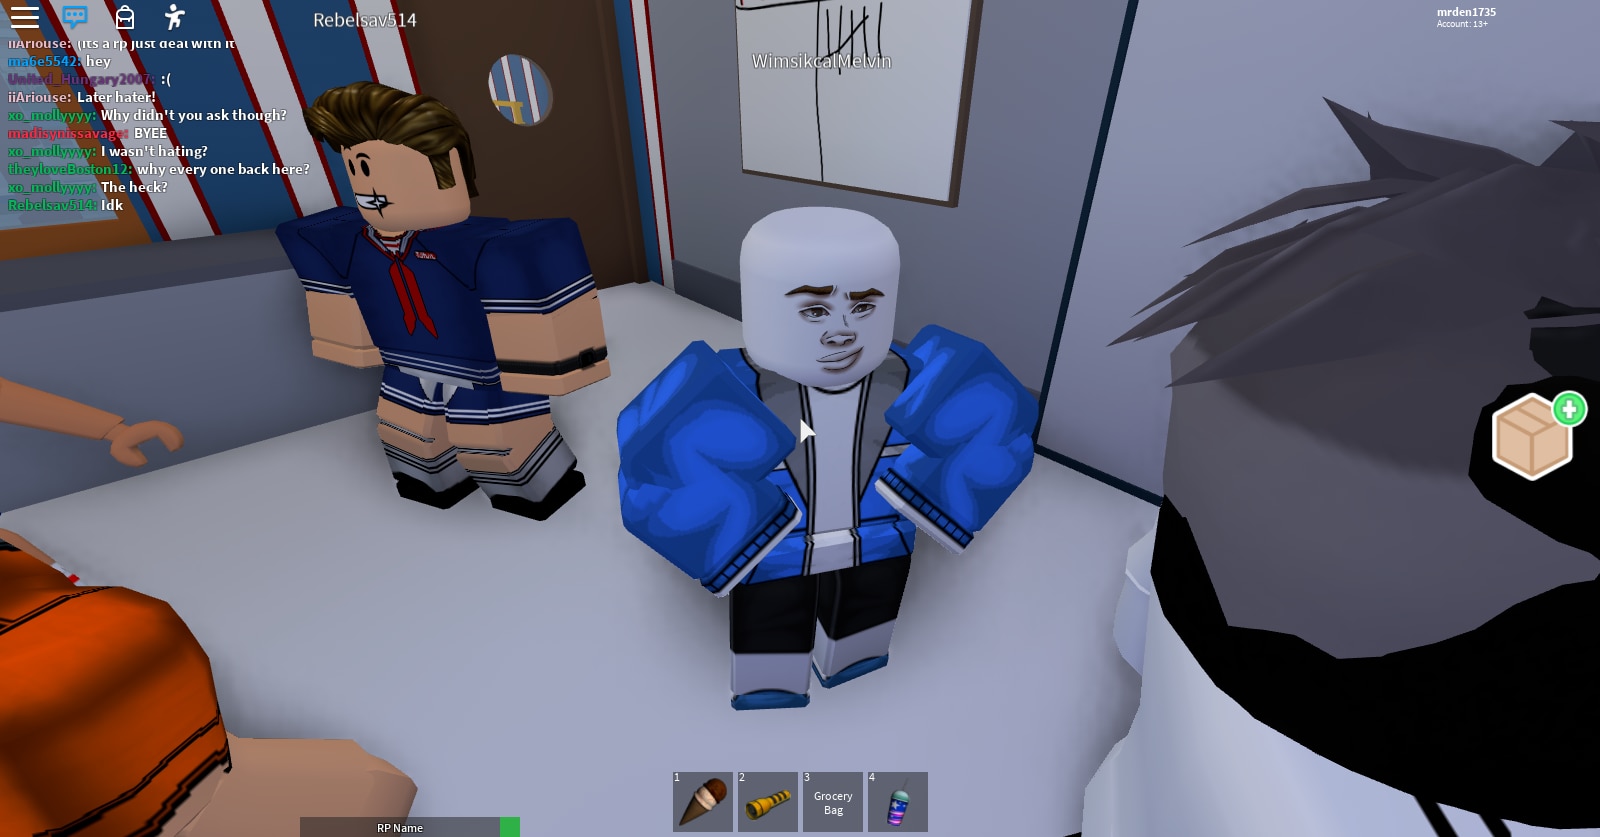 So I VOICE CALLED A Gay Roblox Slender And This Happened 